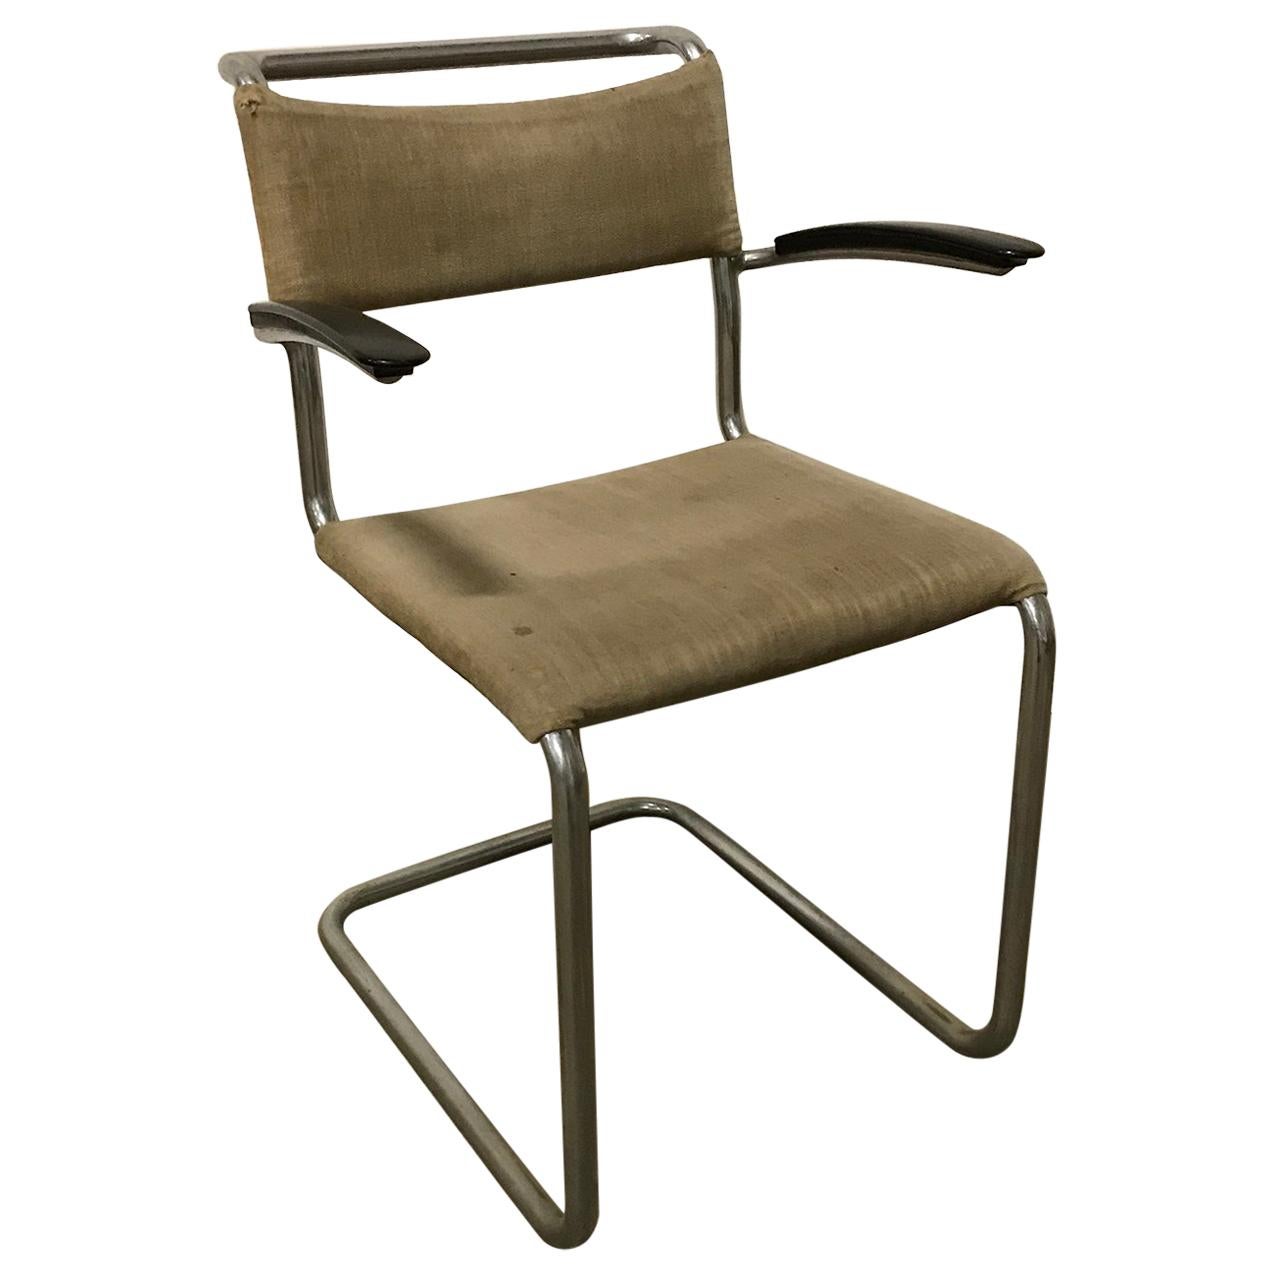 1930, W.H. Gispen, Original Very Early 204 Chair with Horse Hair Filling